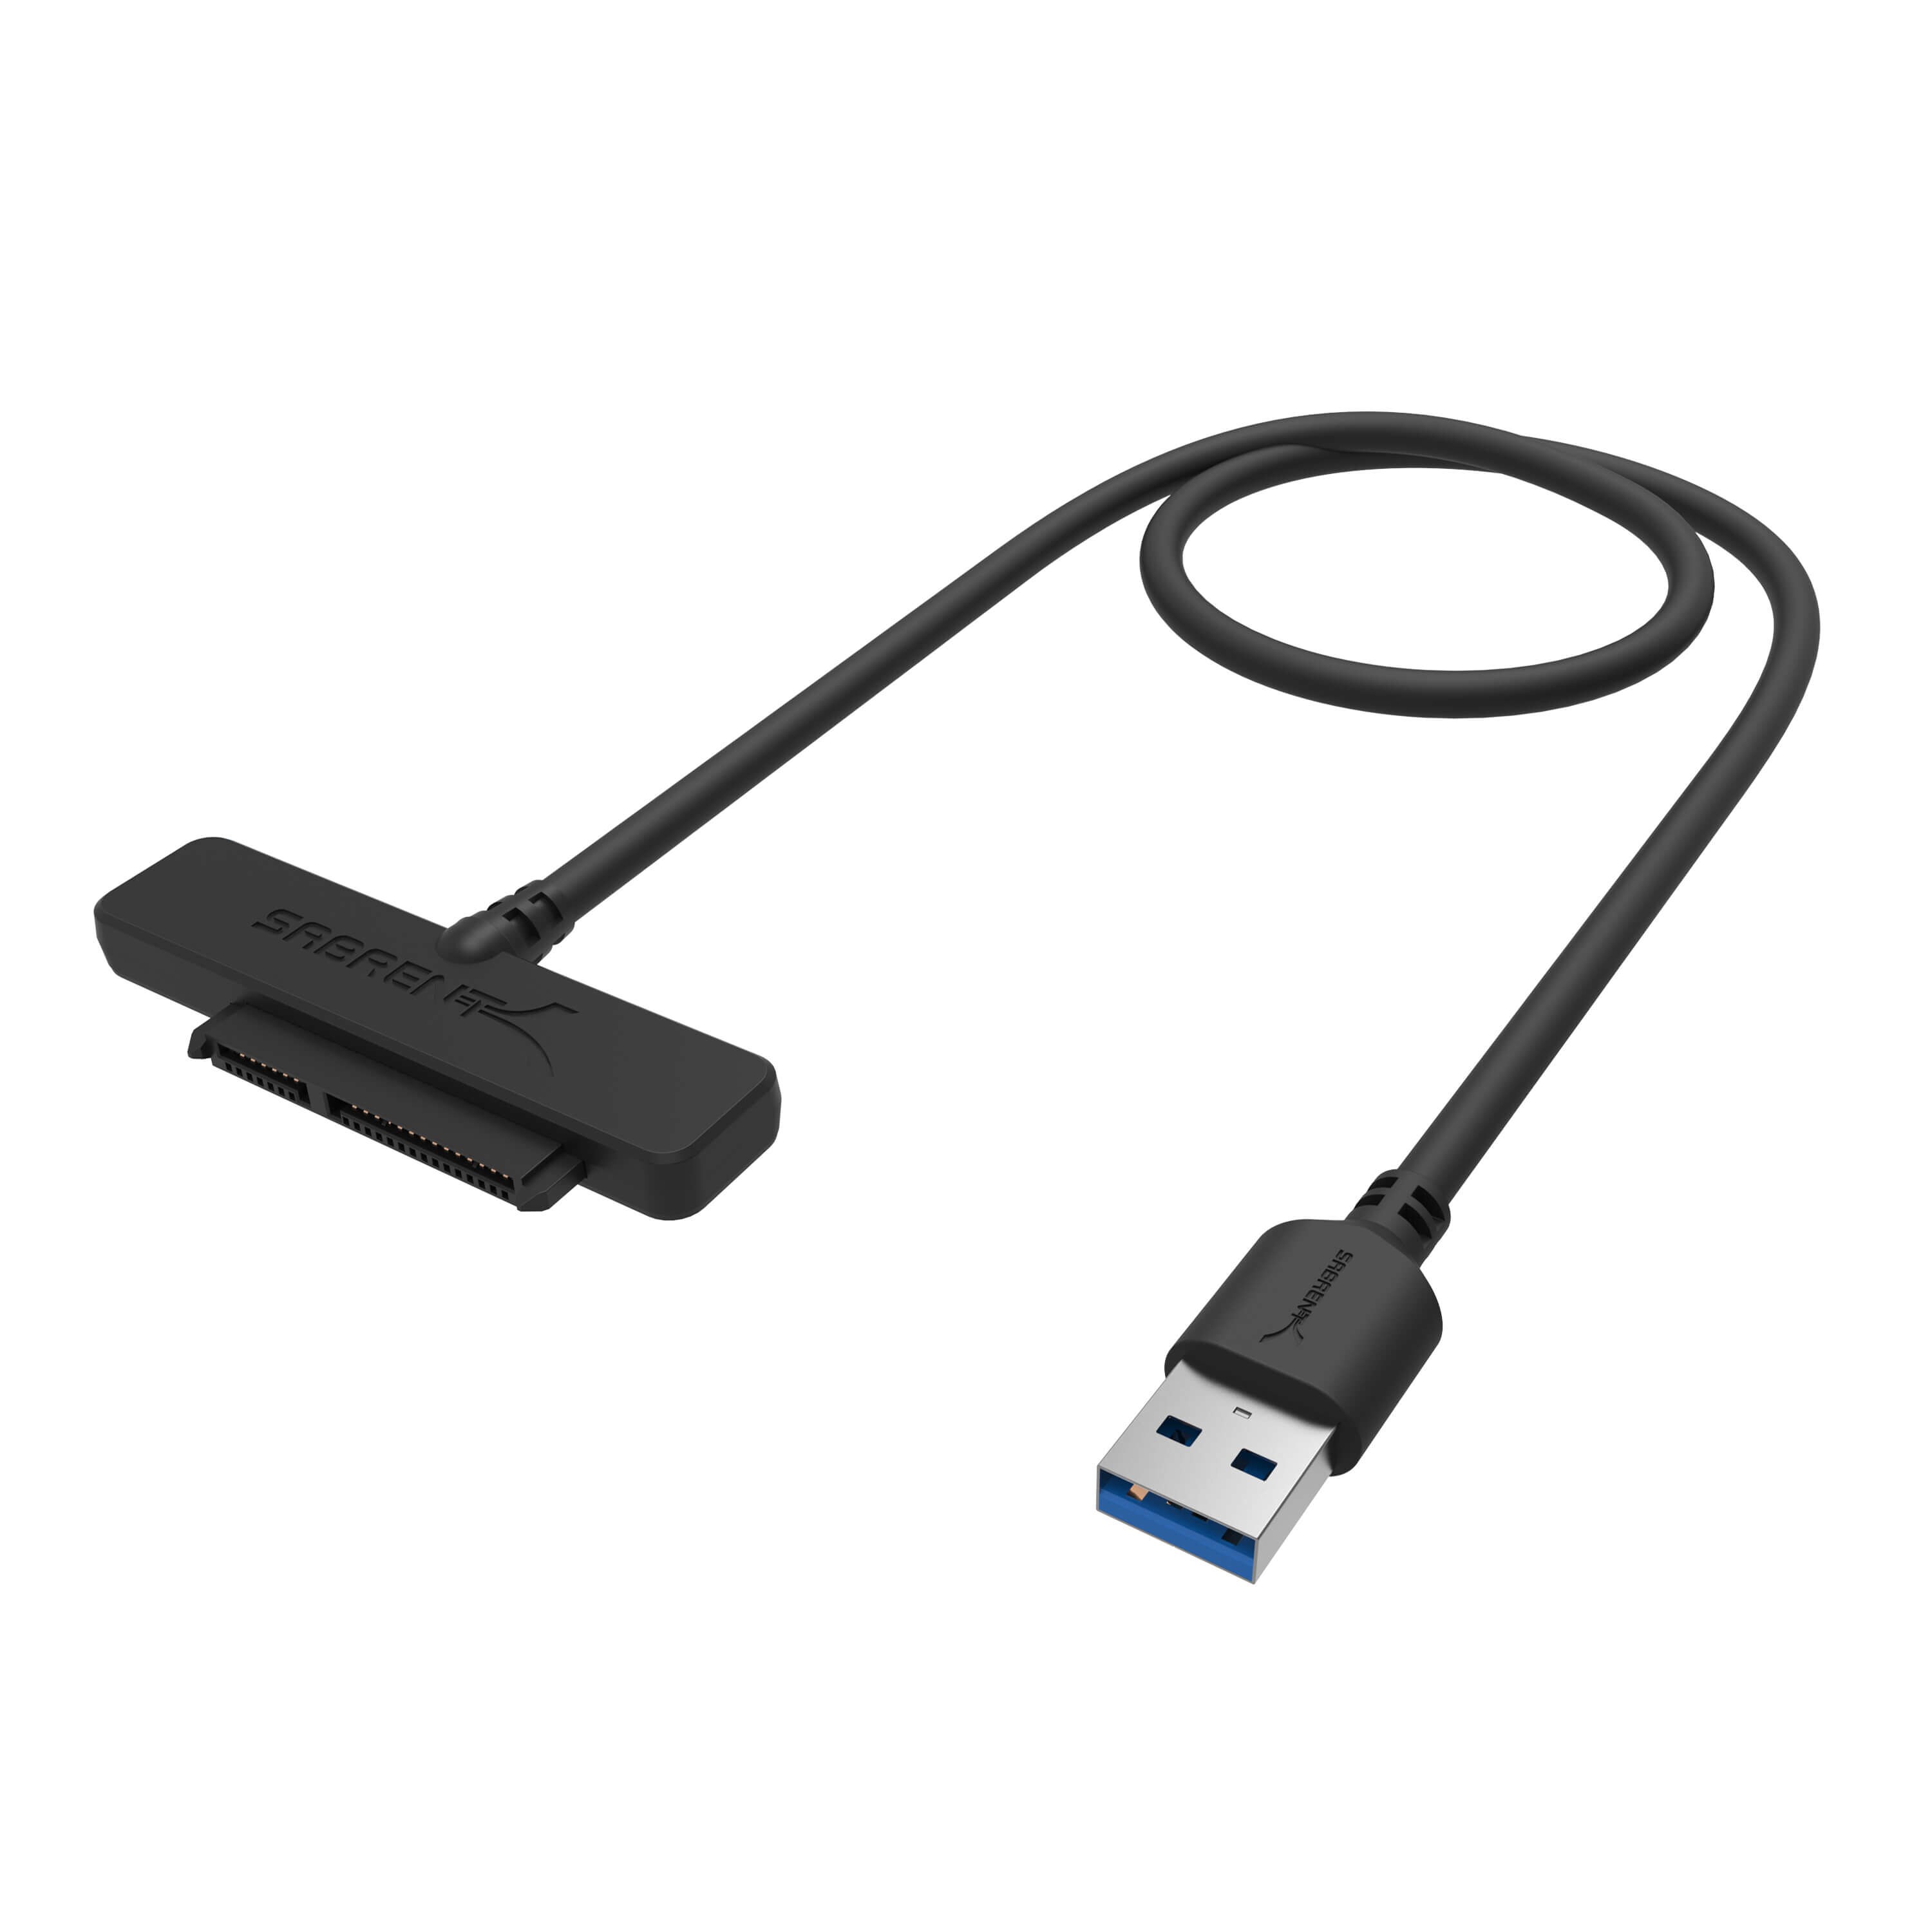 sabrent usb to serial adapter how to sata